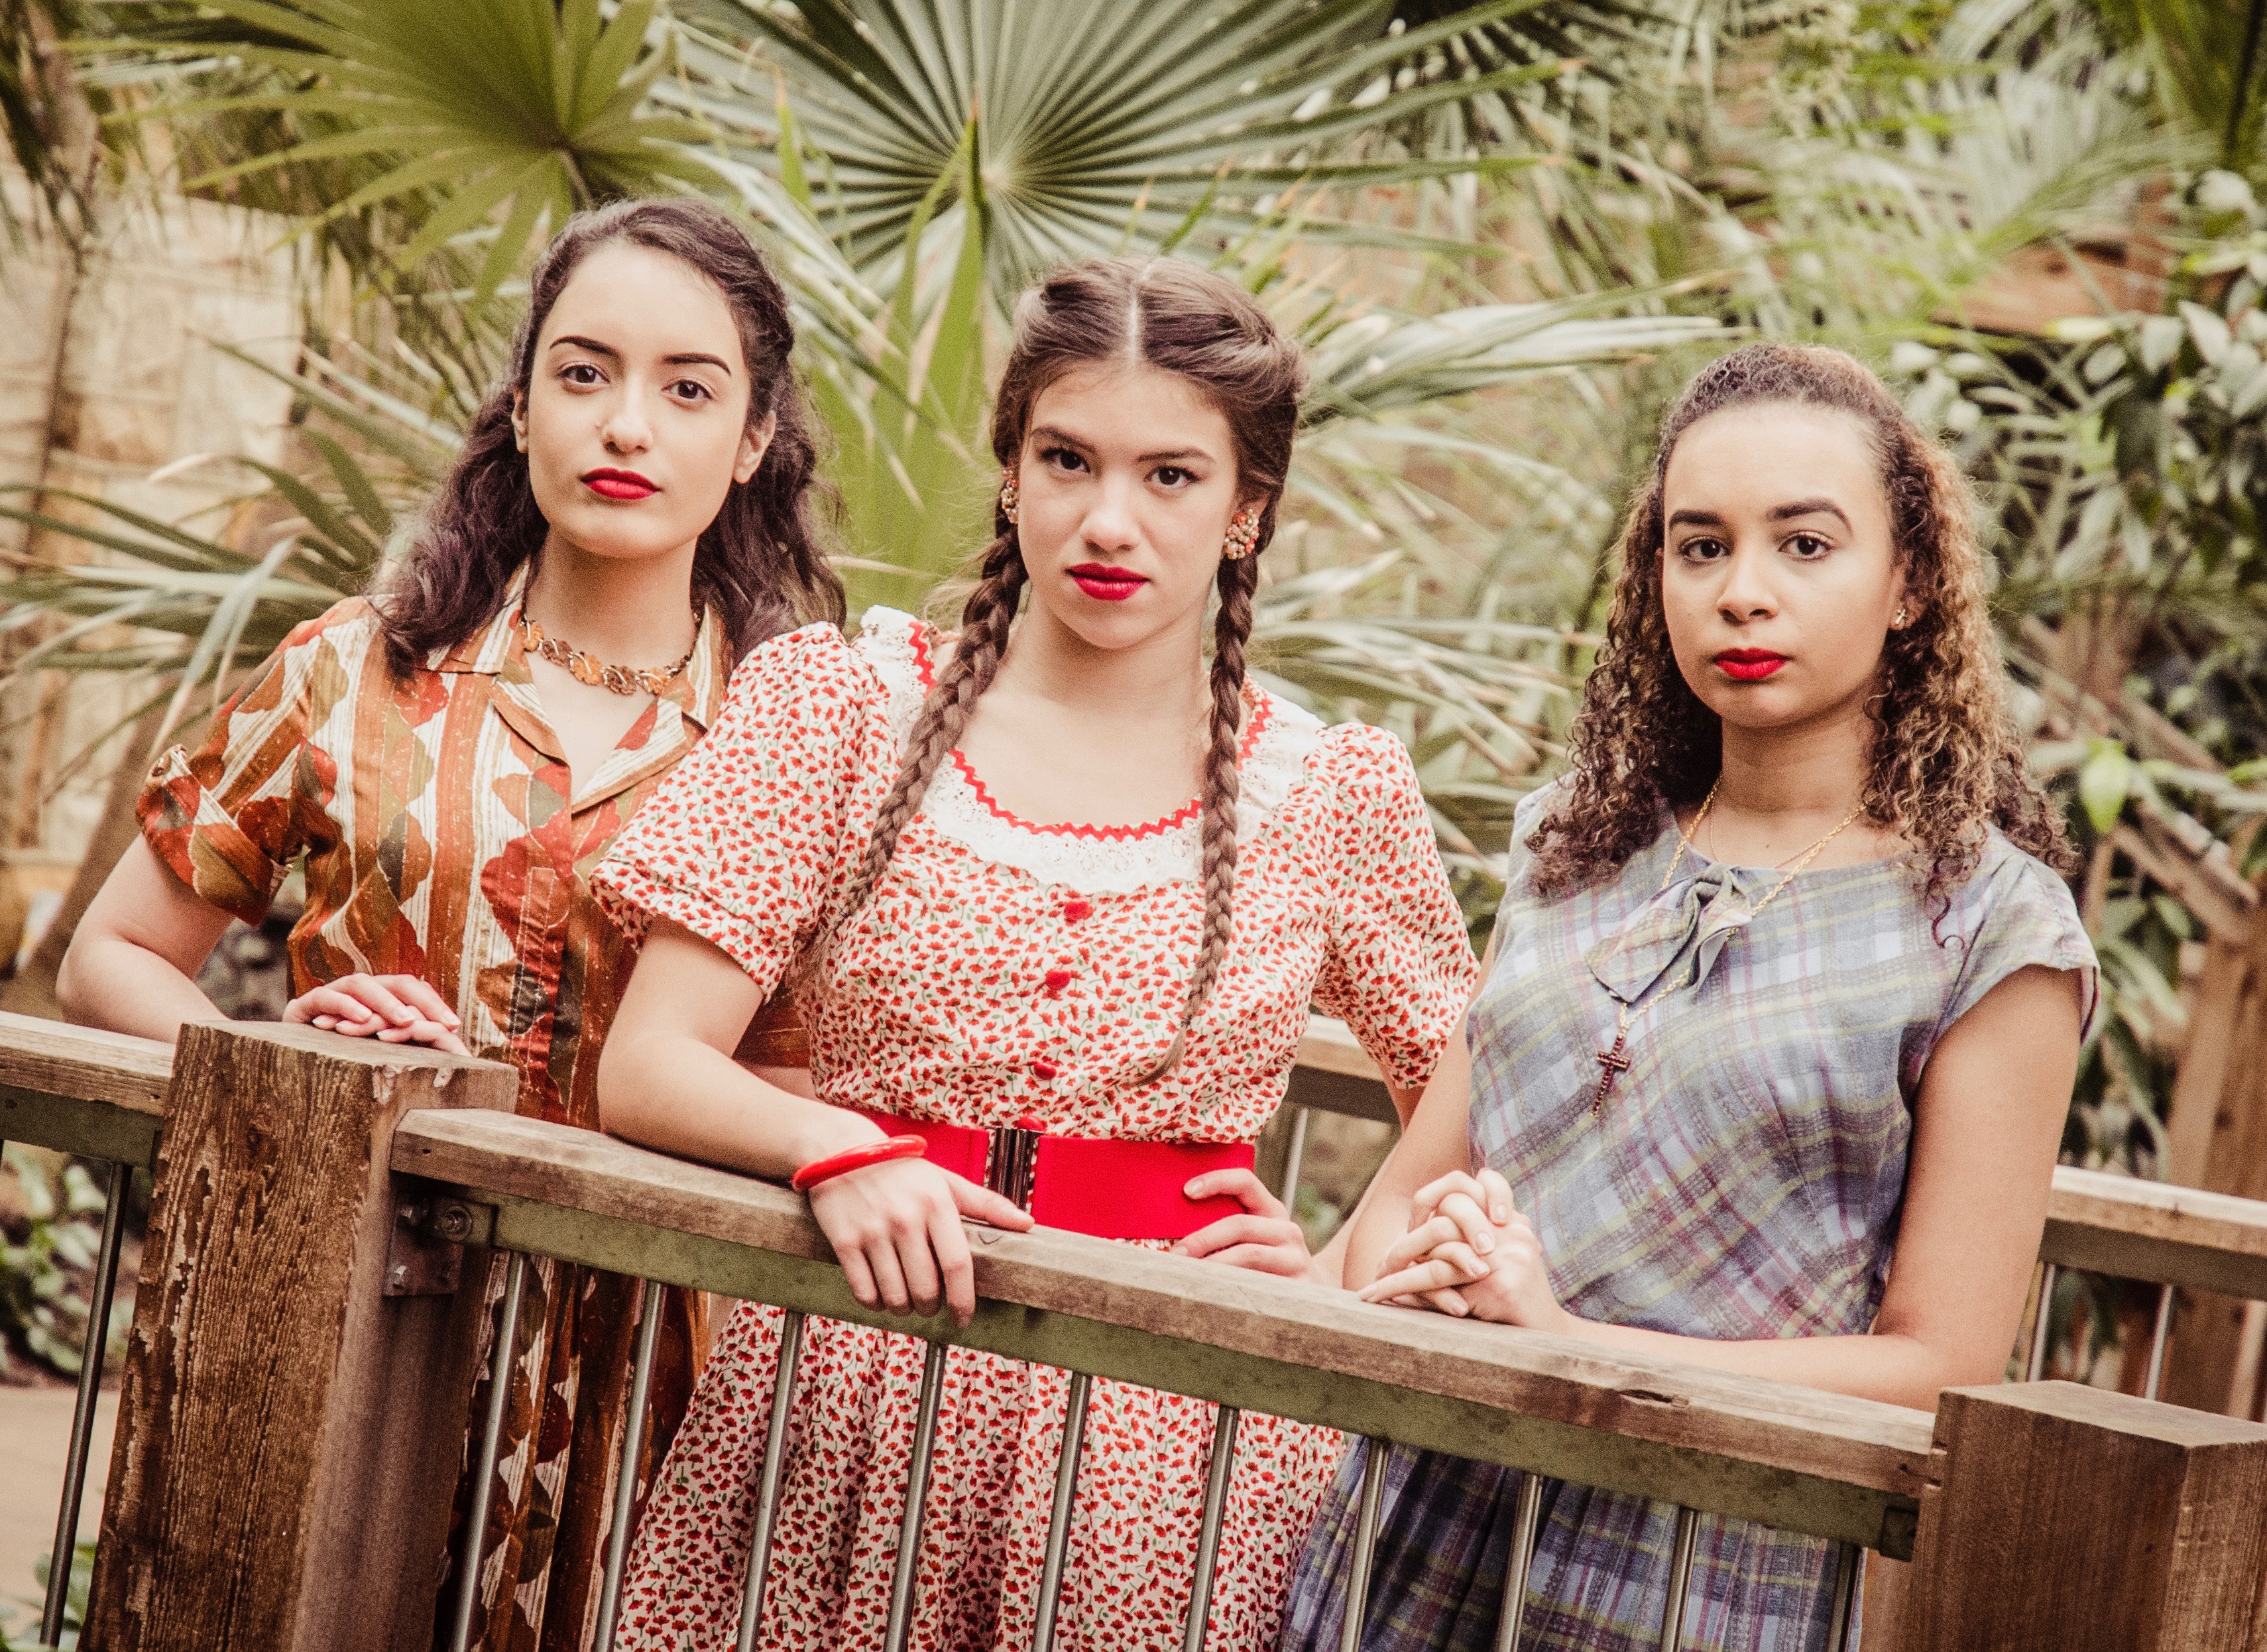 'In the Time of the Butterflies' is a recent stage adaptation, by Caridad Svich, of the true-life novel about women who dared to oppose a dictatorial regime in the Dominican Republic. It's at Prime Stage Theatre, and playing the trio who called themselves 'the butterflies' are (L to R) Evelyn Hernandez, Frances Tirado, and Krystal Rivera. (photo: Laura Slovesko)